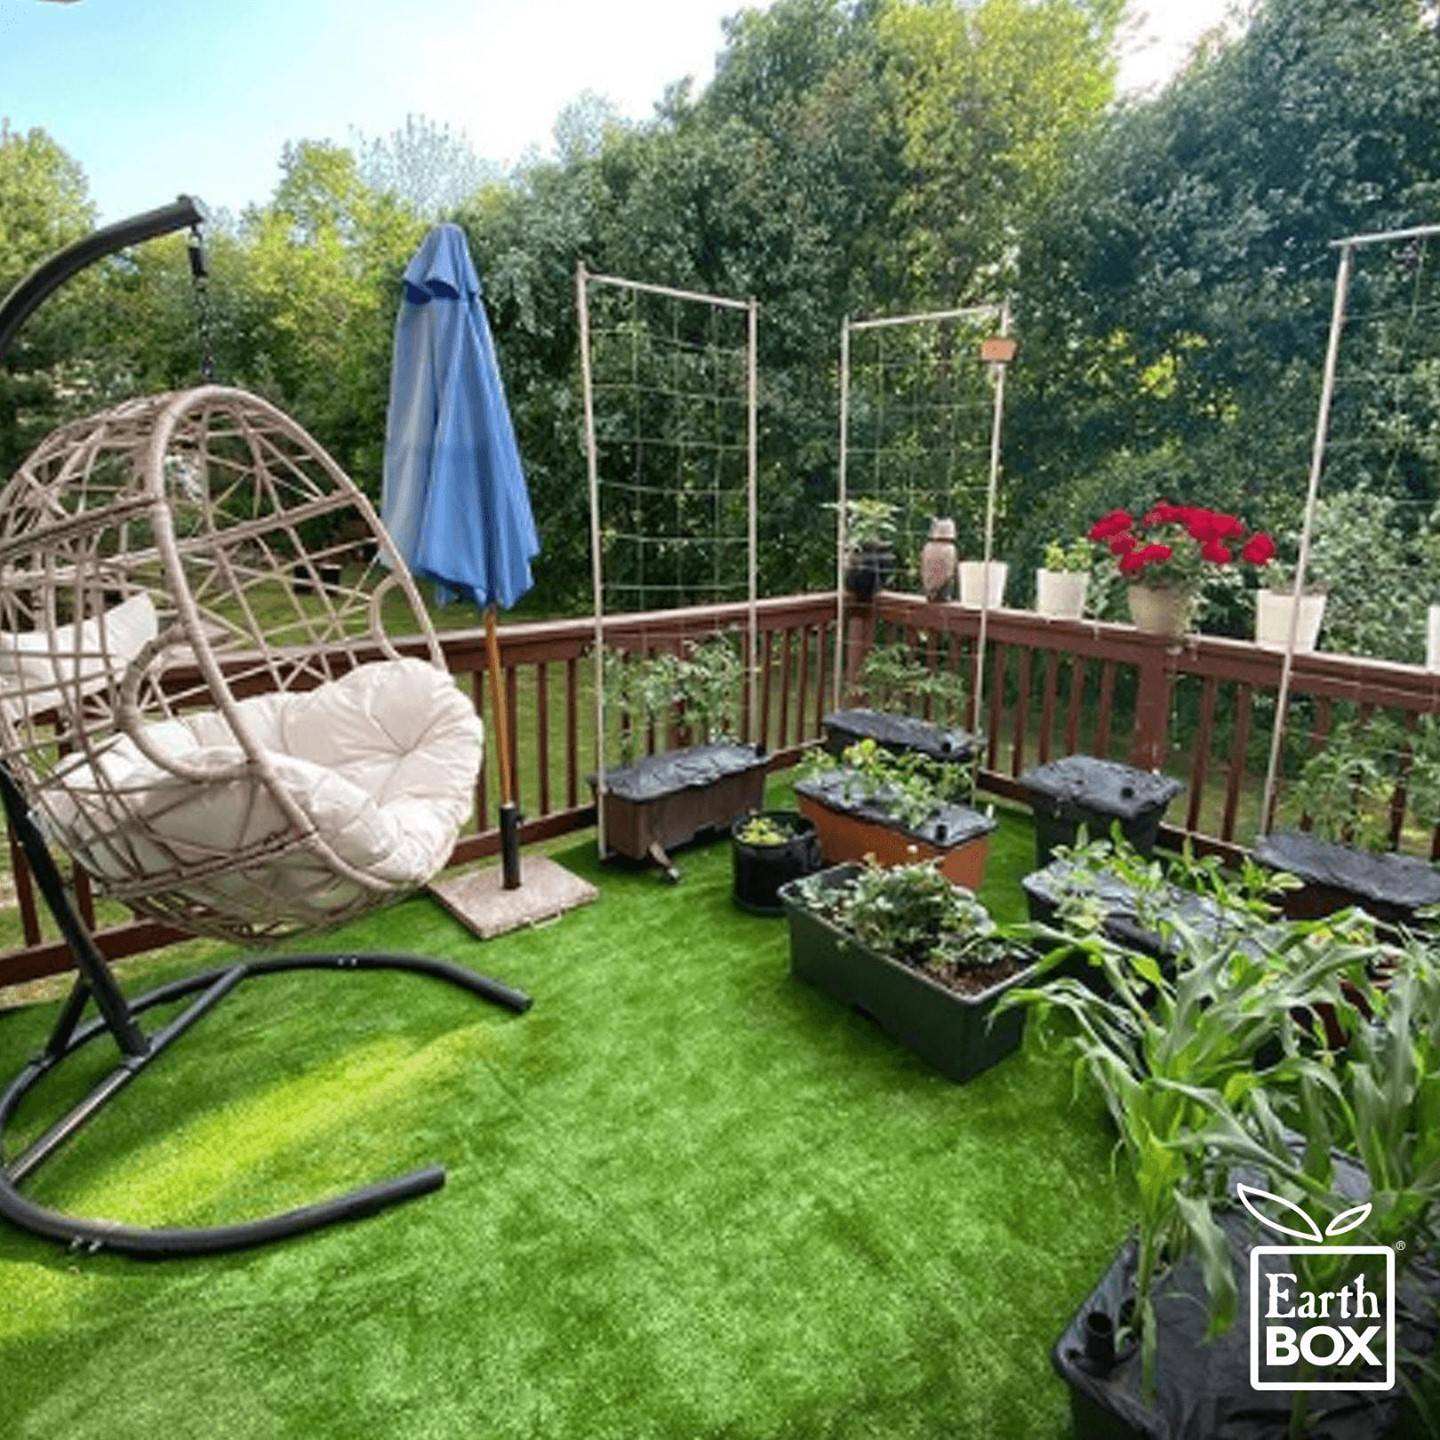 Outdoor garden space with swing and EarthBox gardening containers